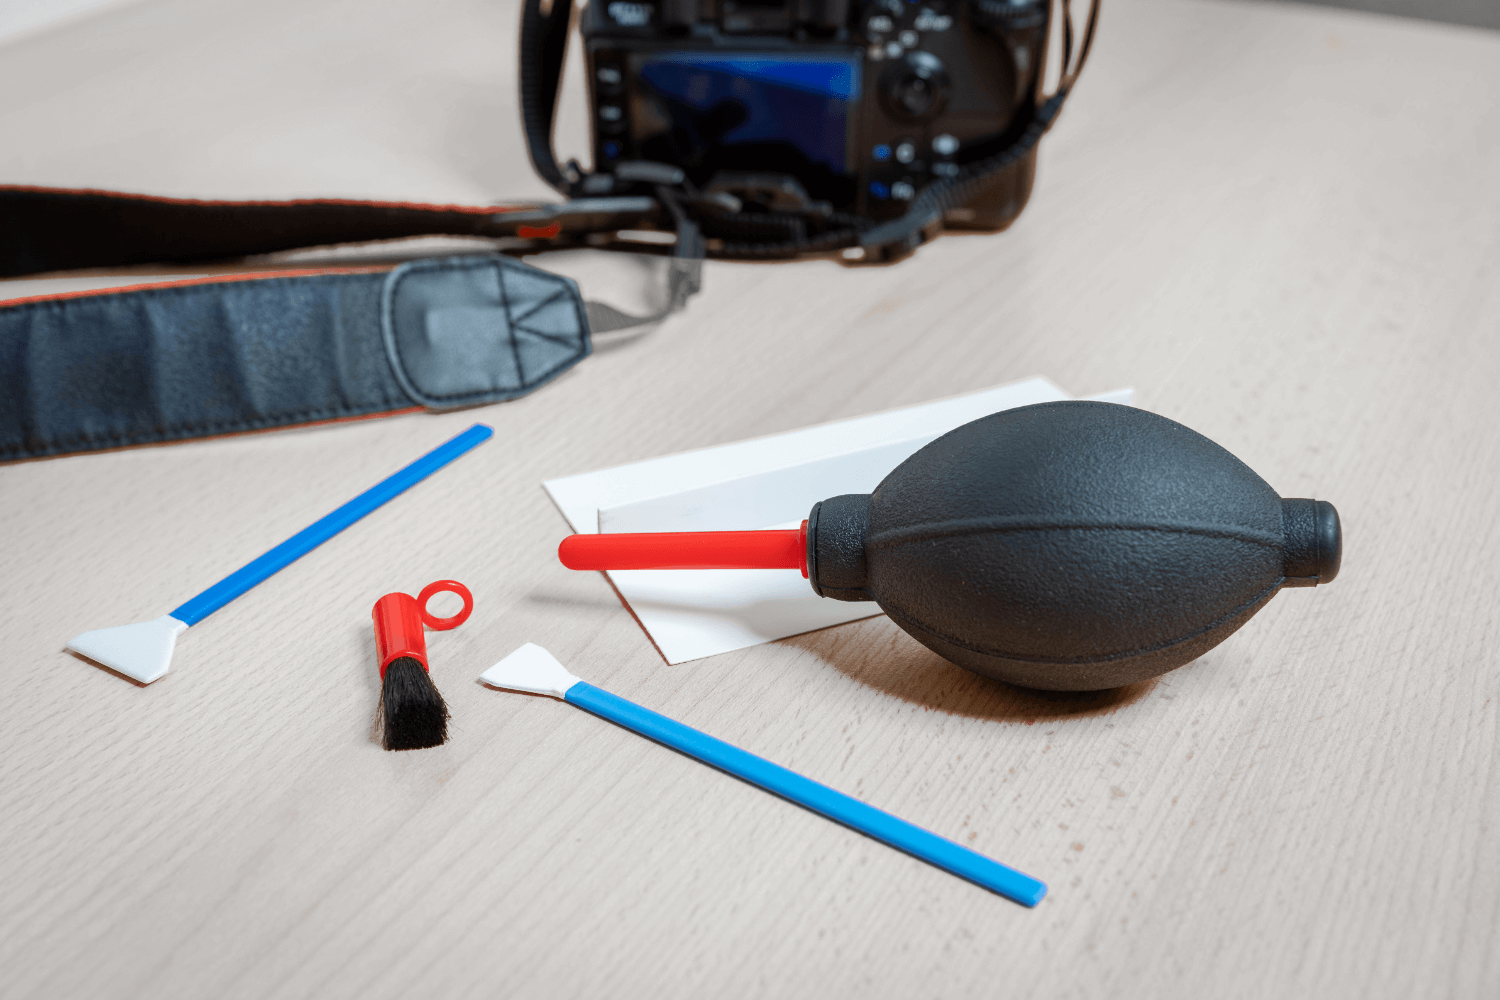 How to clean your camera sensor, sensor cleaning tools